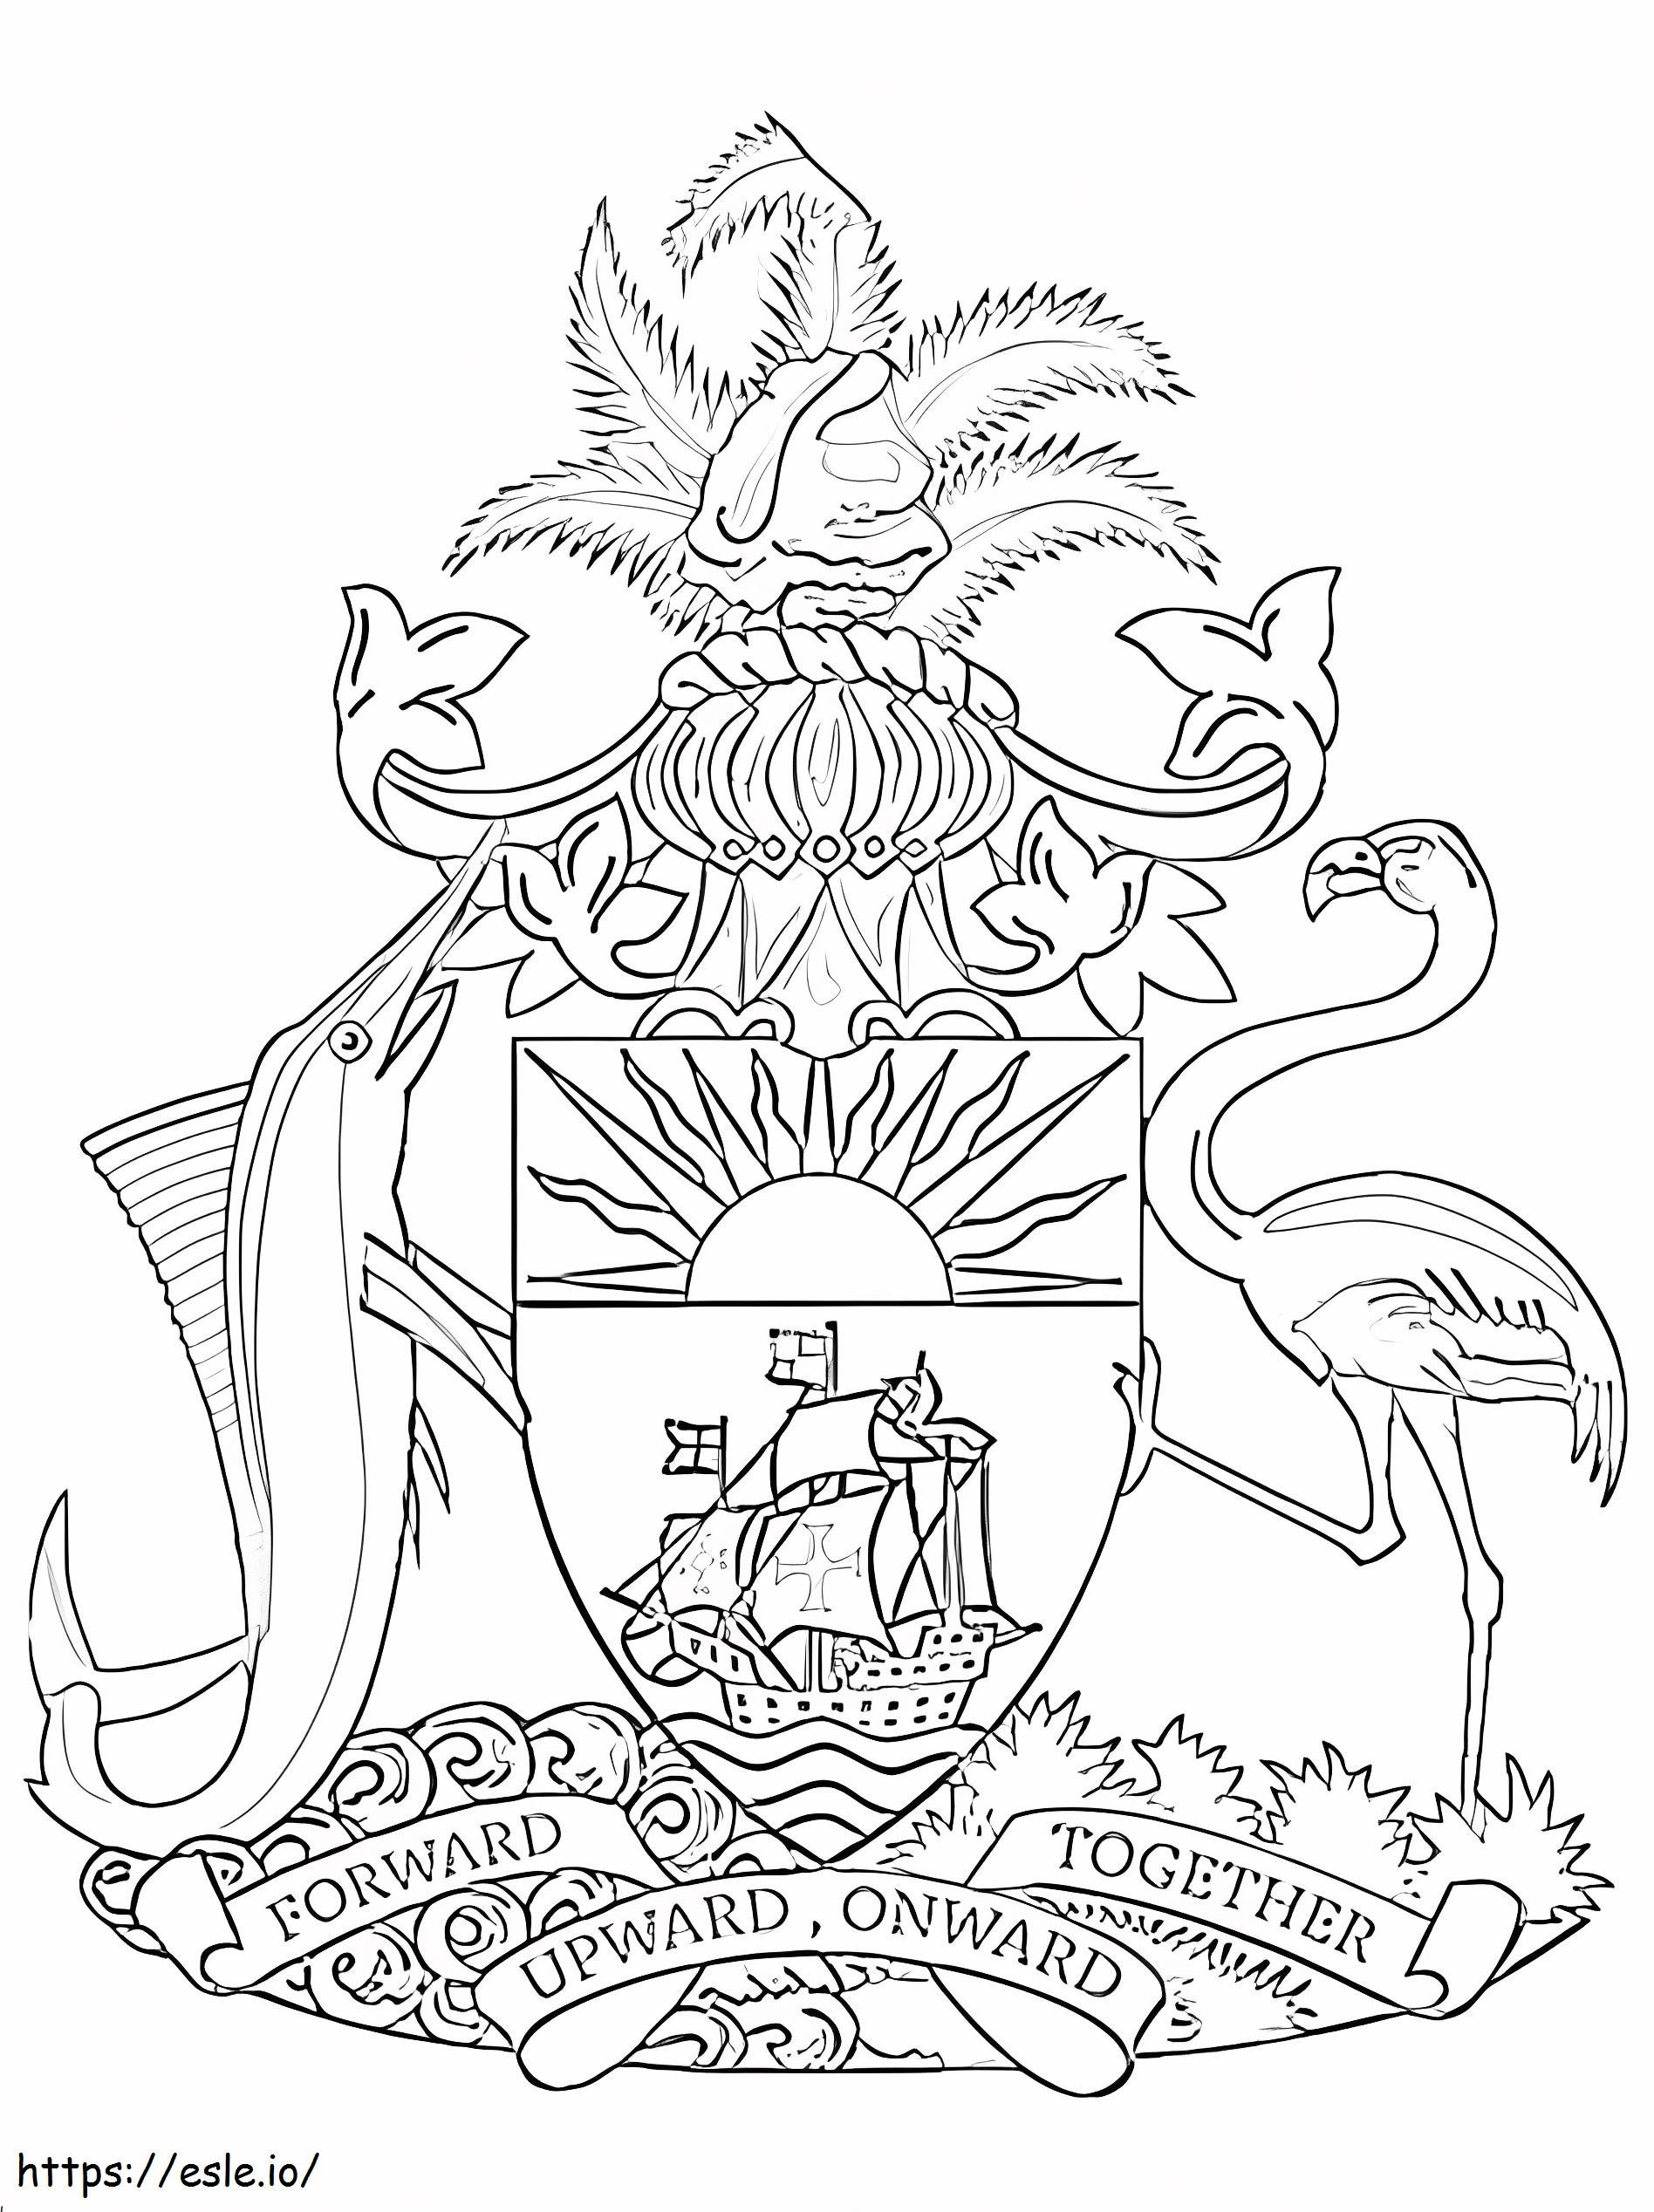 Coat Of Arms Of Bahamas coloring page